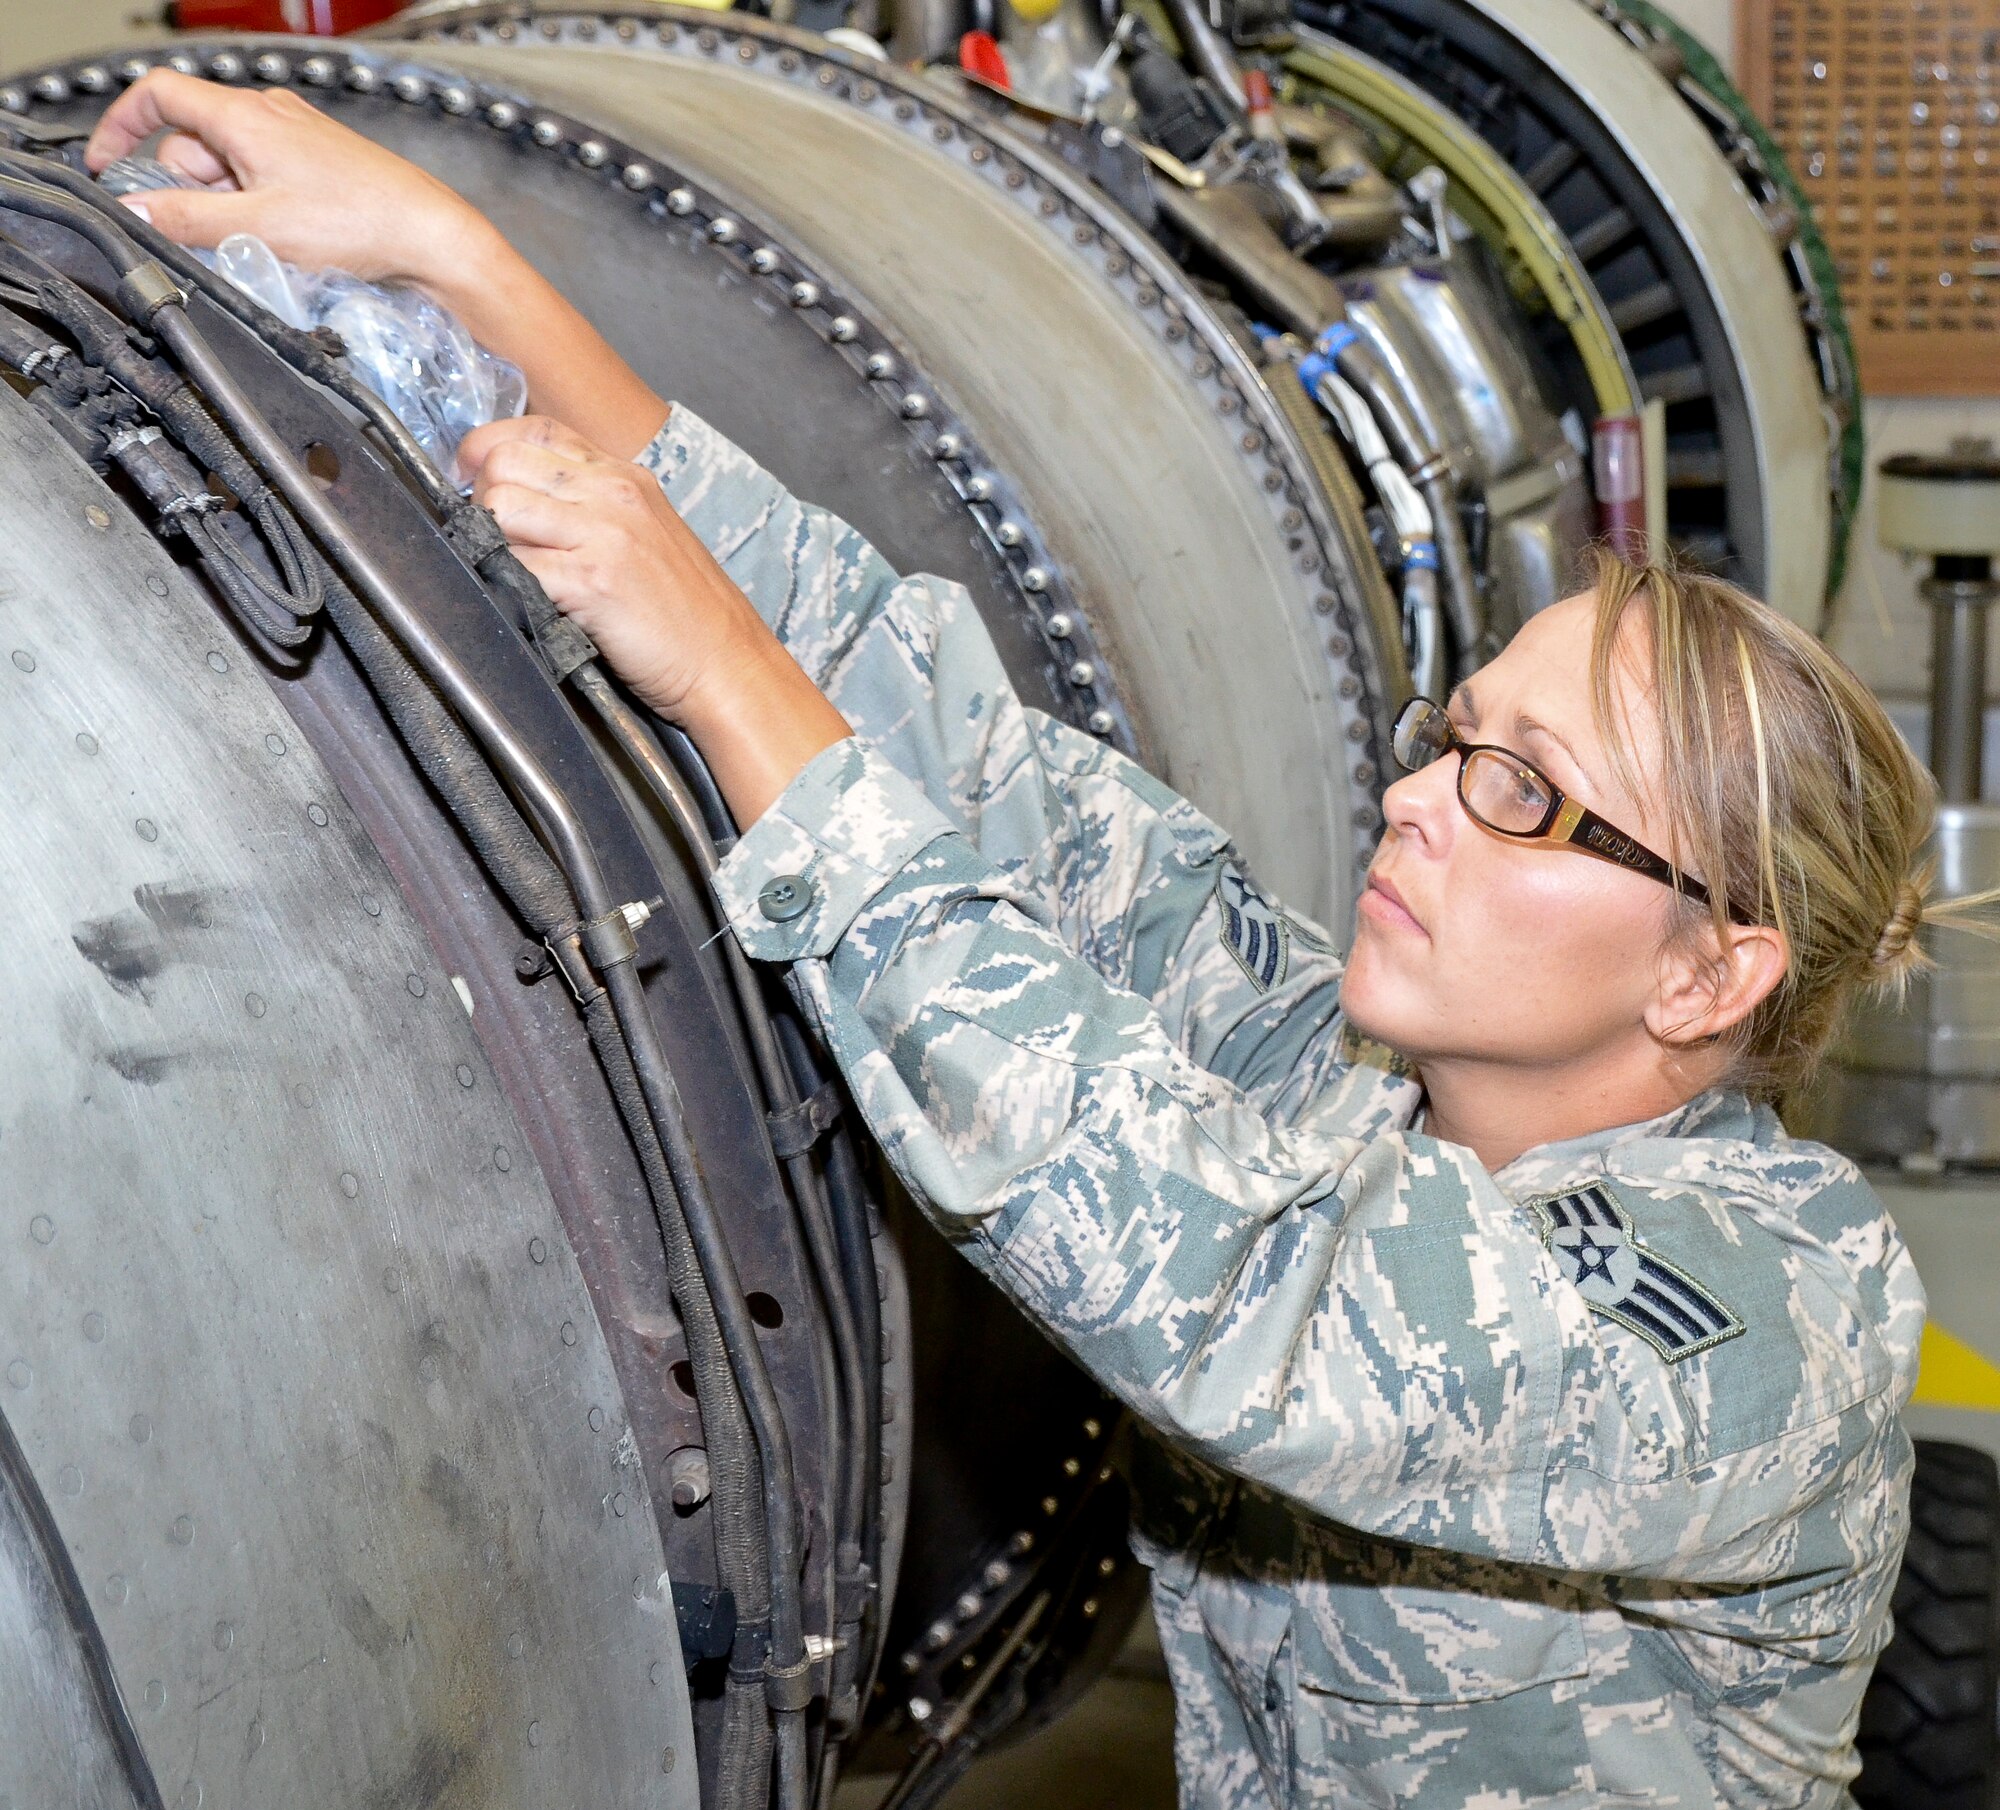 U.S. Air Force Senior Airman Crystal Steiger, an aerospace propulsion mechanic with the 116th Maintenance Group, Georgia Air National Guard, ensures tube openings are covered on a TF-33 Pratt and Whitney jet engine that is used on the E-8C Joint STARS at Robins Air Force Base, Ga., July 17, 2014.  Steiger was the 2013 Airman of the Year award winner for the 116th Air Control Wing. (U.S. Air National Guard photo by Tech. Sgt. Regina Young/Released)